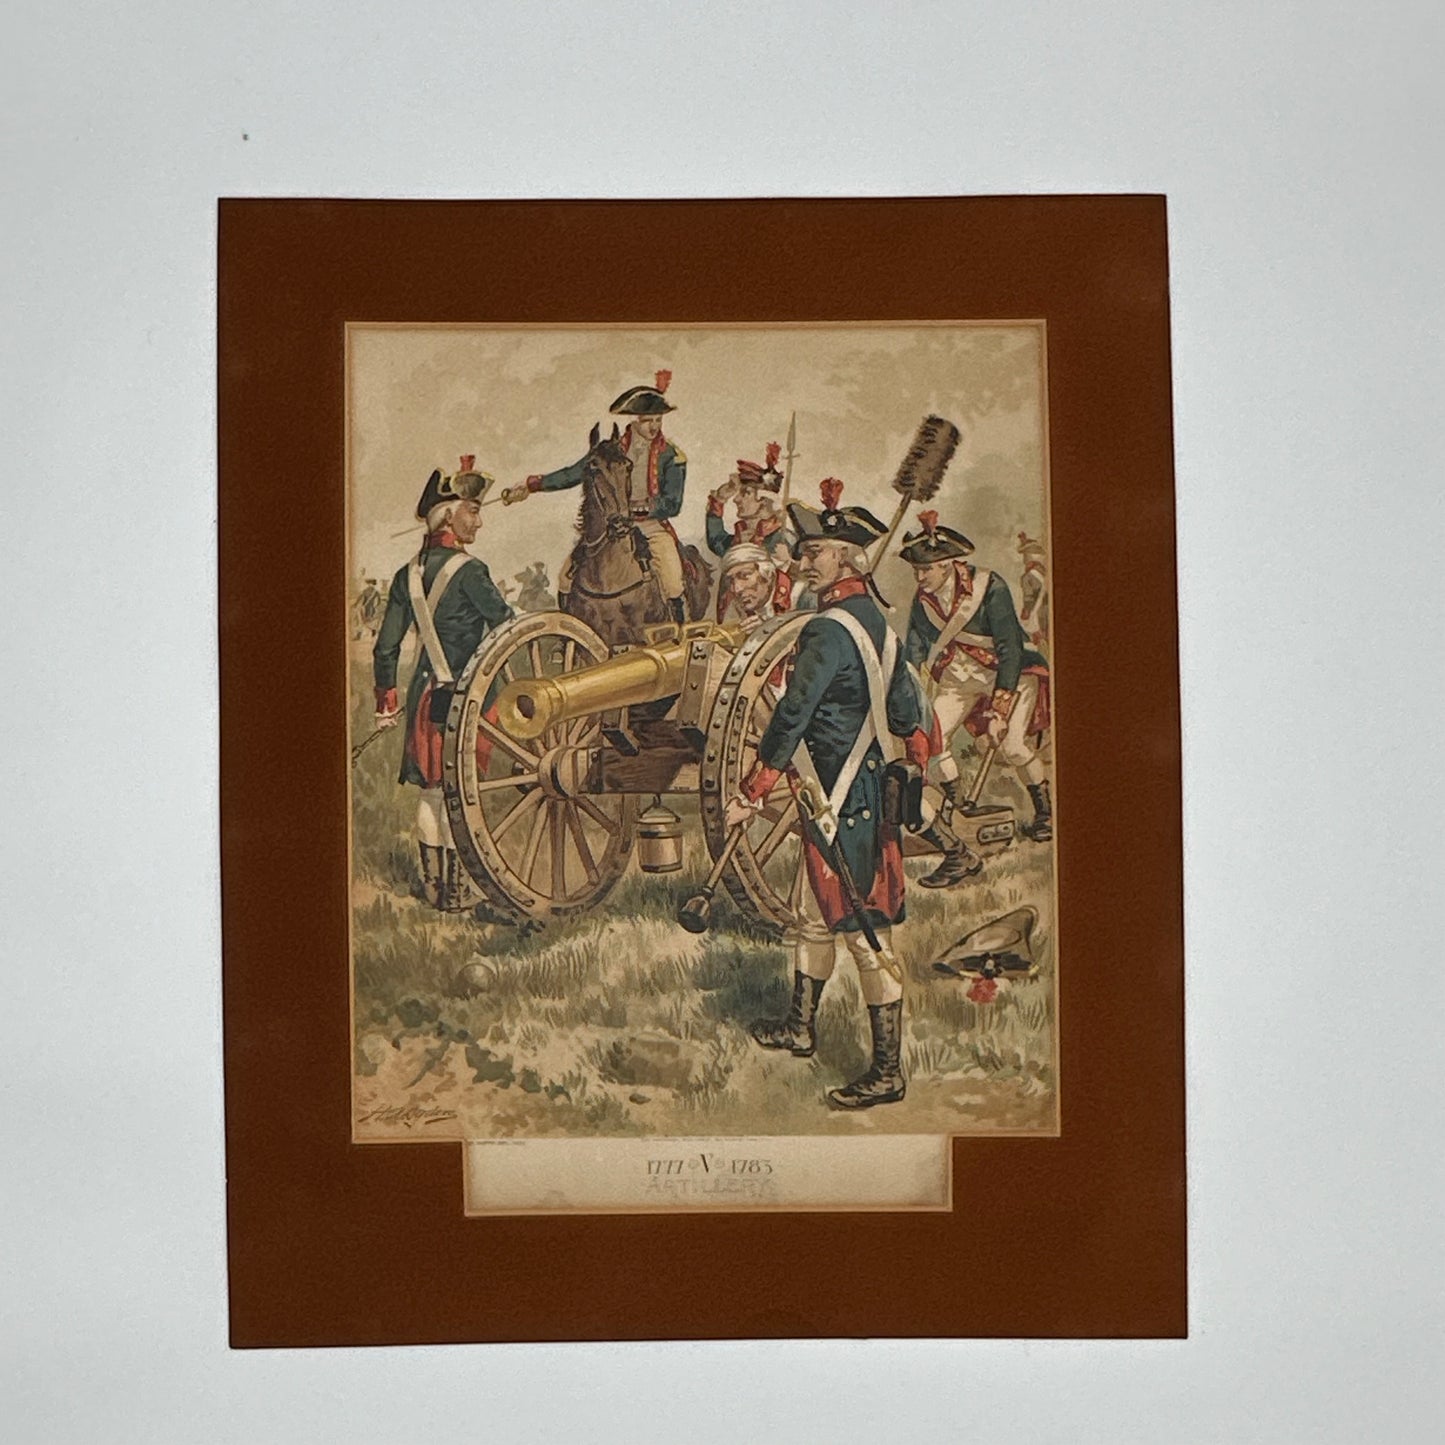 Four historic framed prints of American soldiers in uniform 1774 - 1783 that were commissioned by the Quartermaster General of the Army (1890 - 1907)